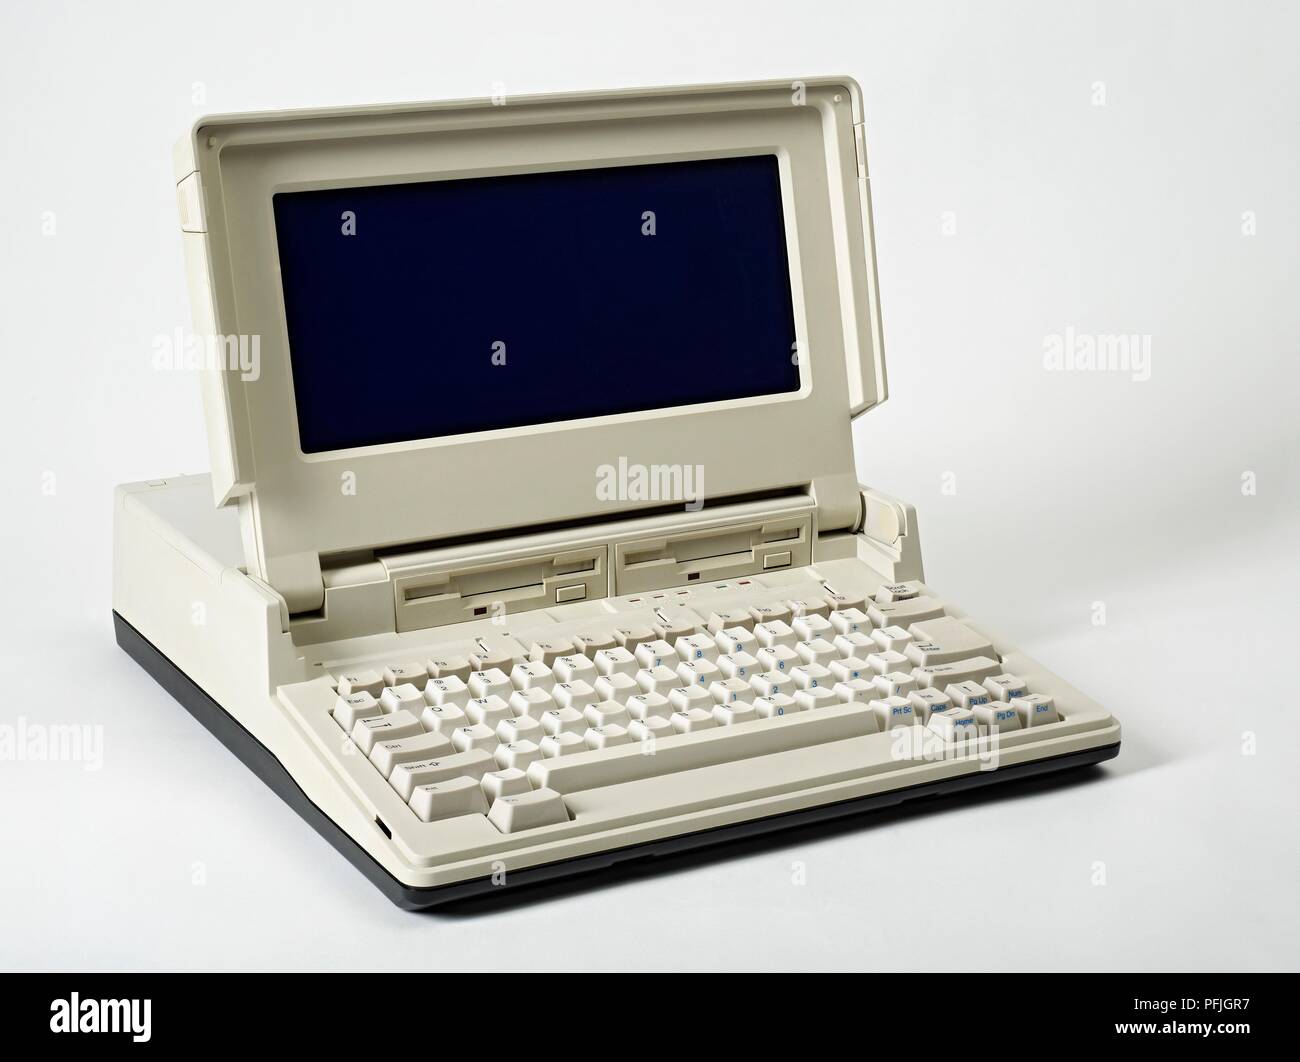 Tandy 1400, early laptop, 1980s Stock Photo